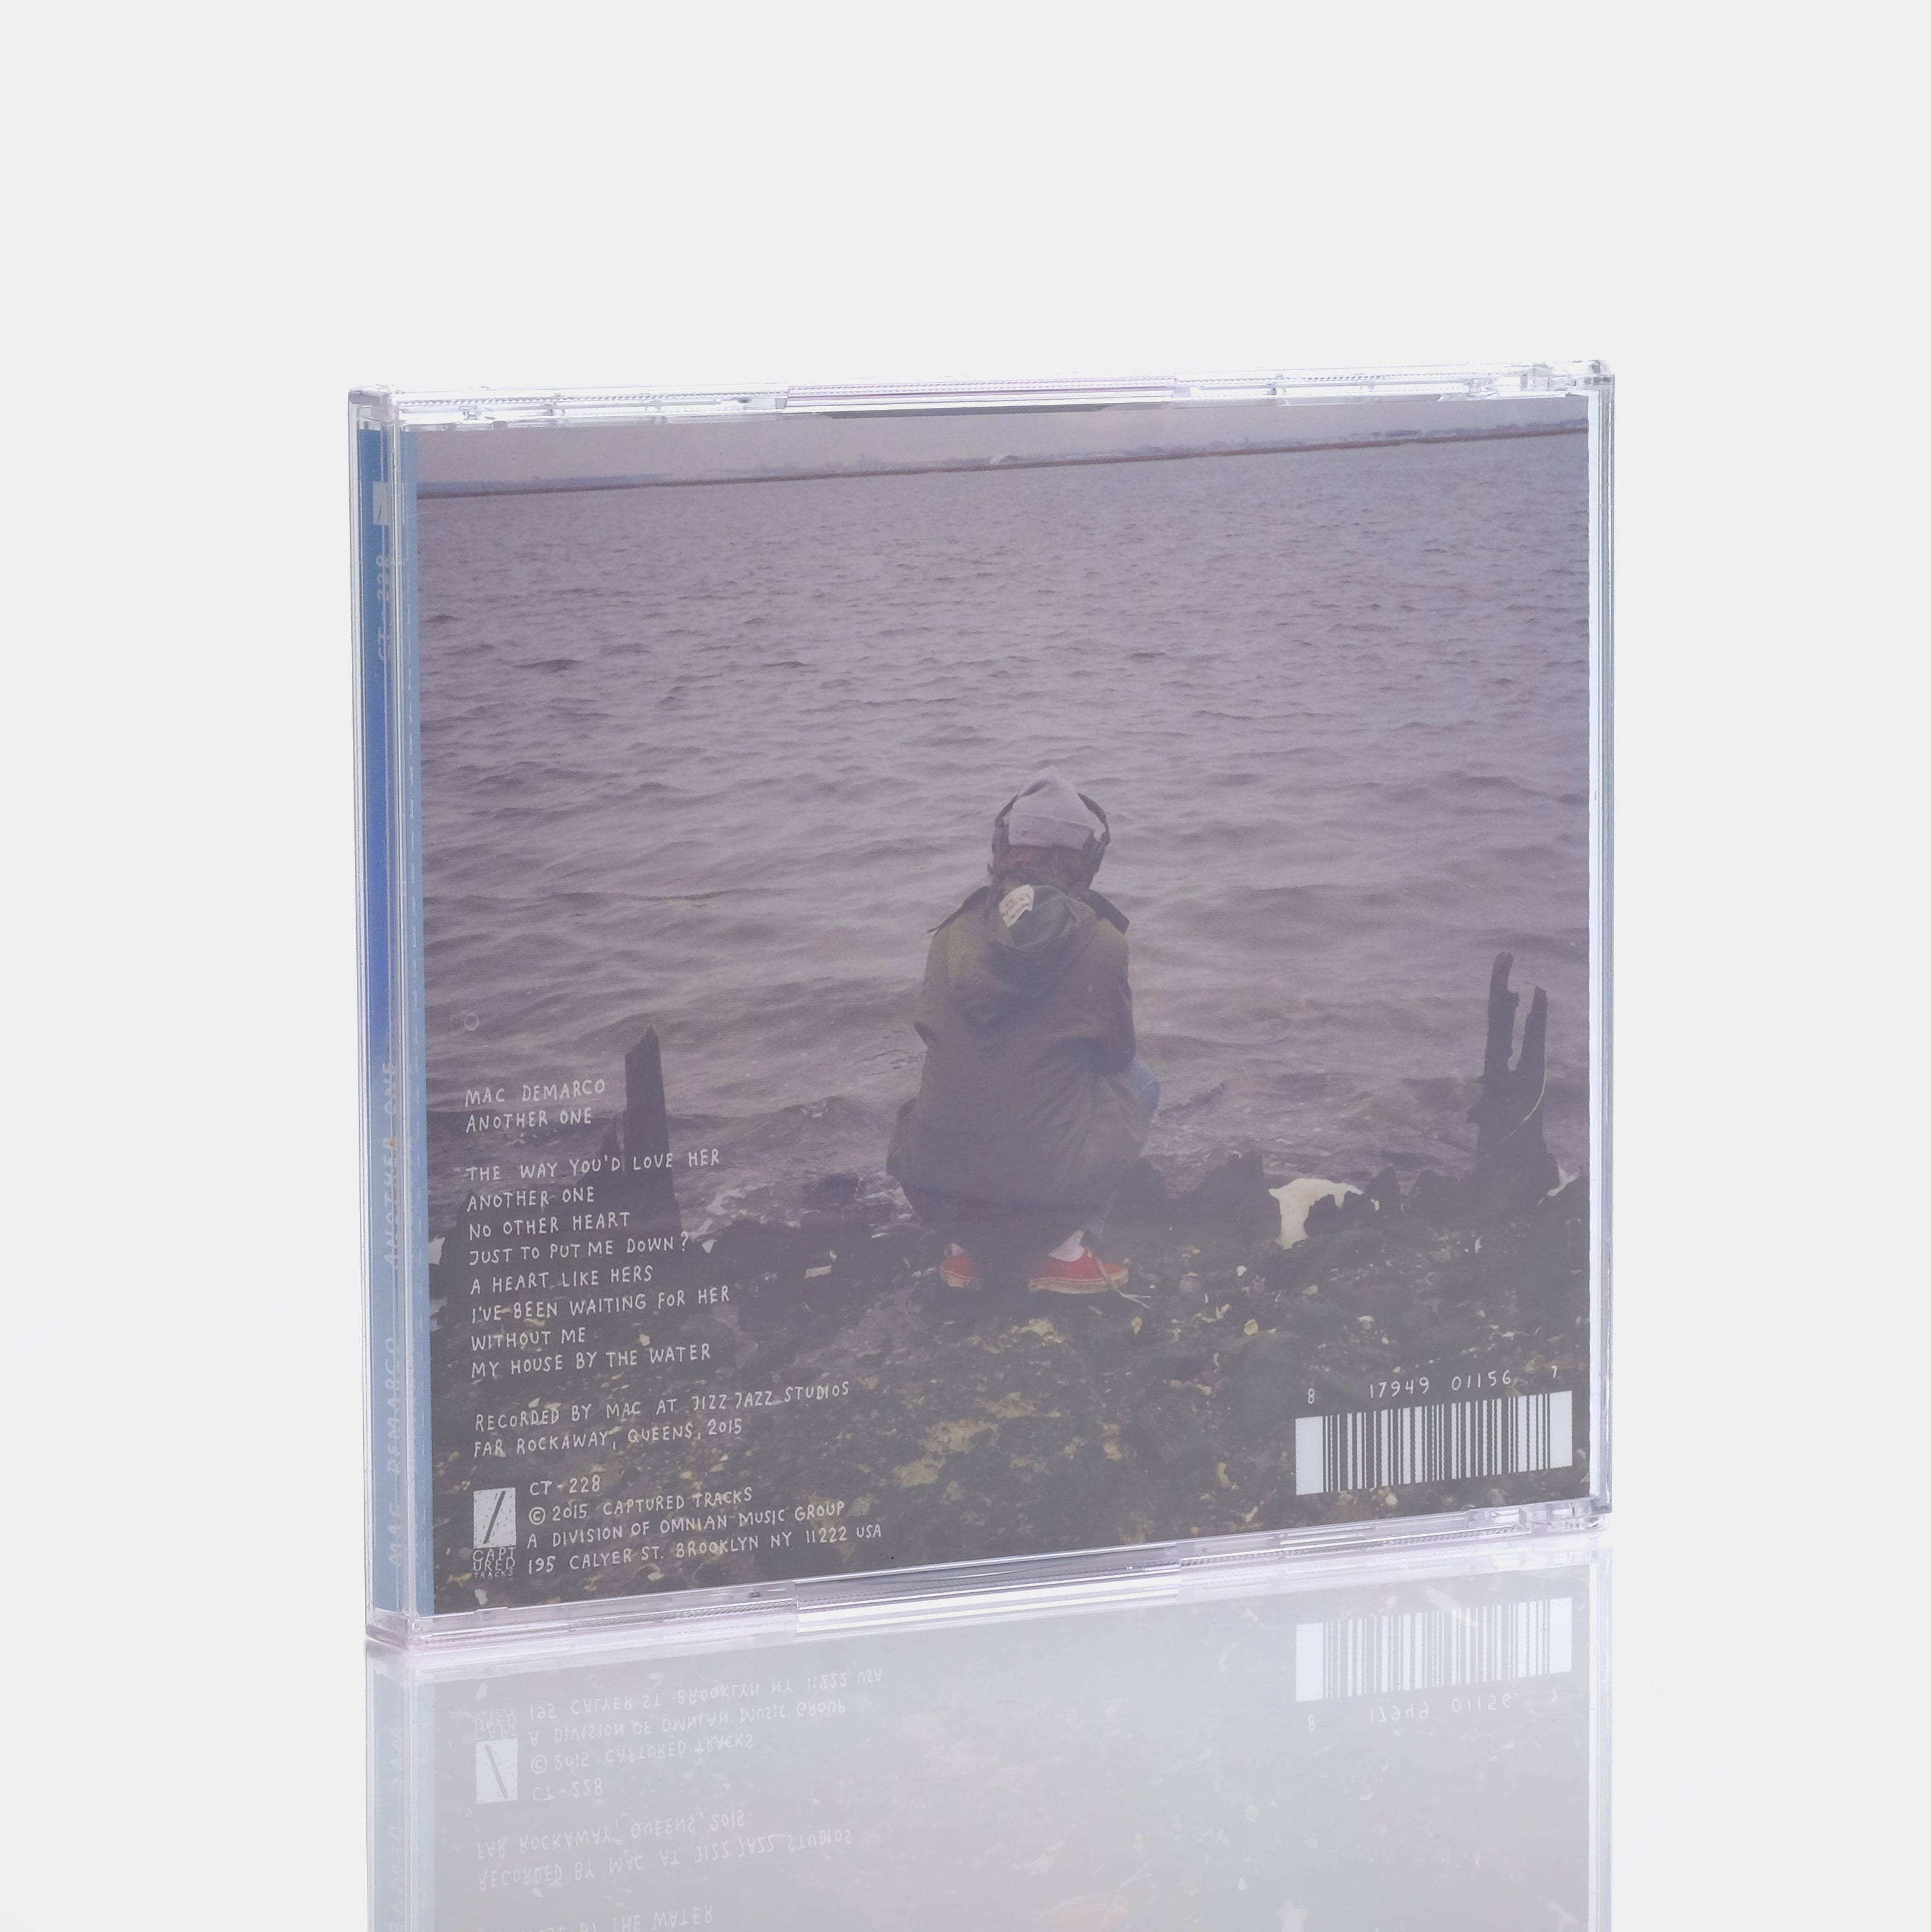 Mac Demarco - Another One CD